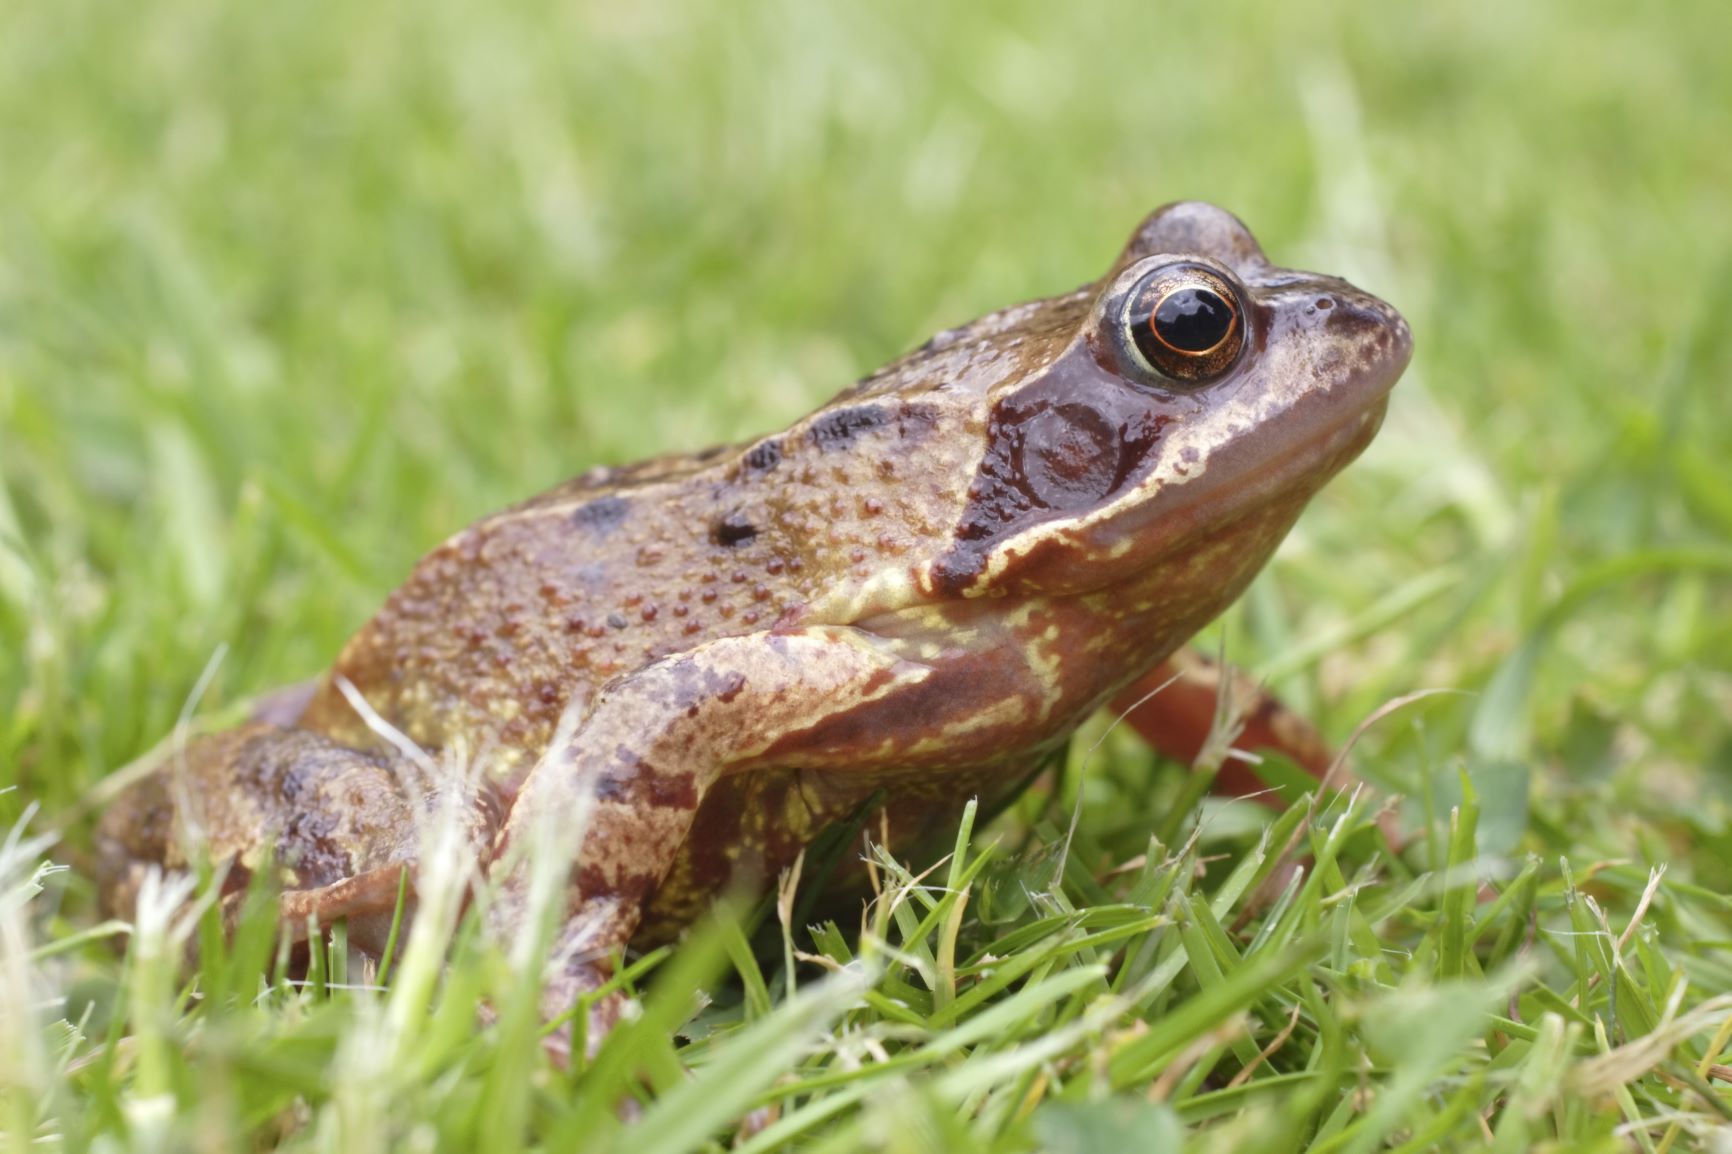 Side view of a common frog on grass 